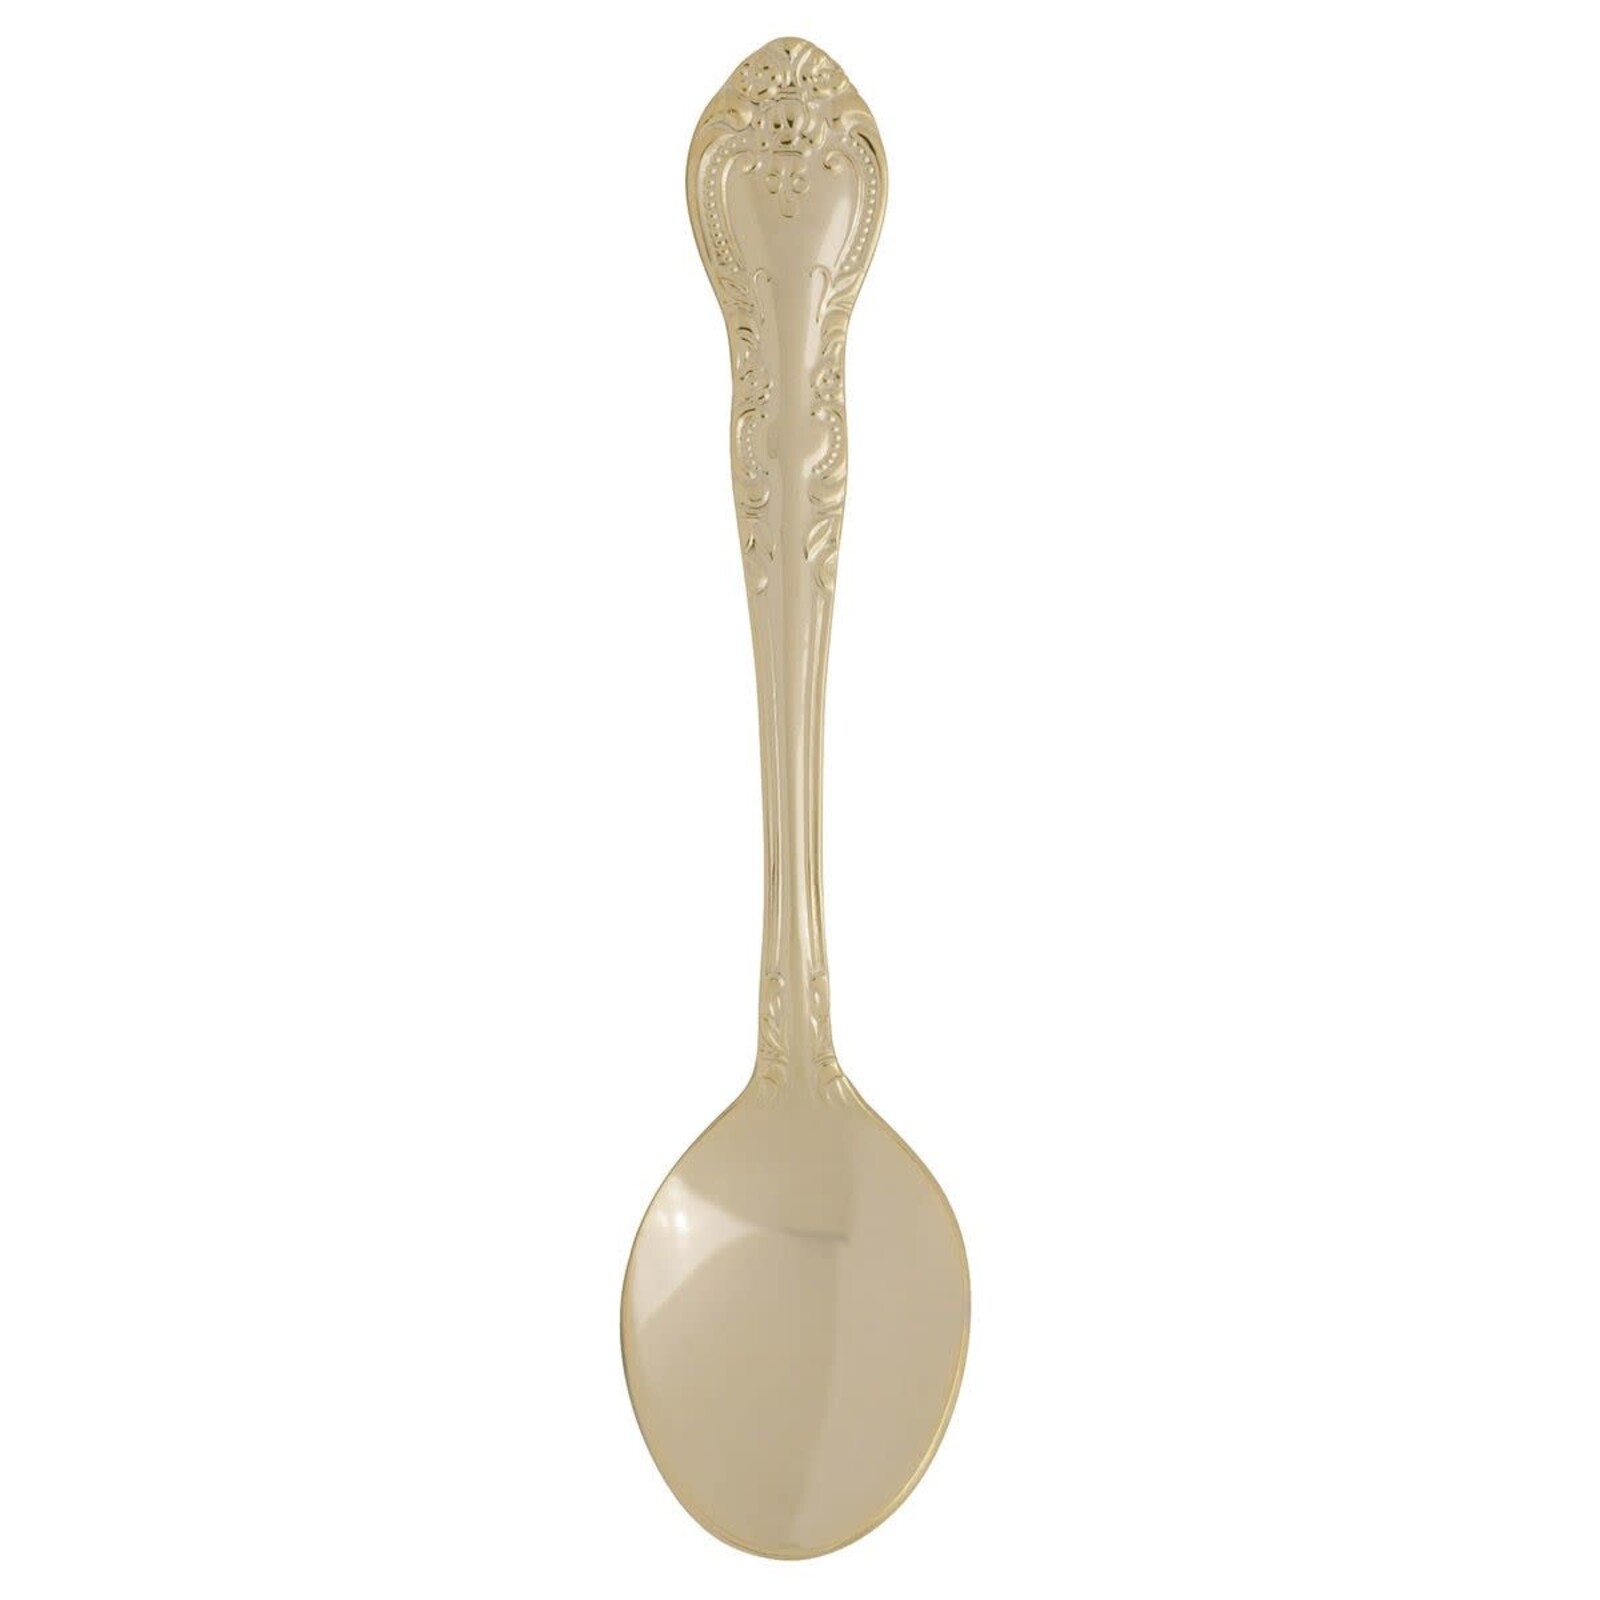 Harold Import Company Fino Demi Spoon, Traditional Design, Gold Plated   DS-8G loading=